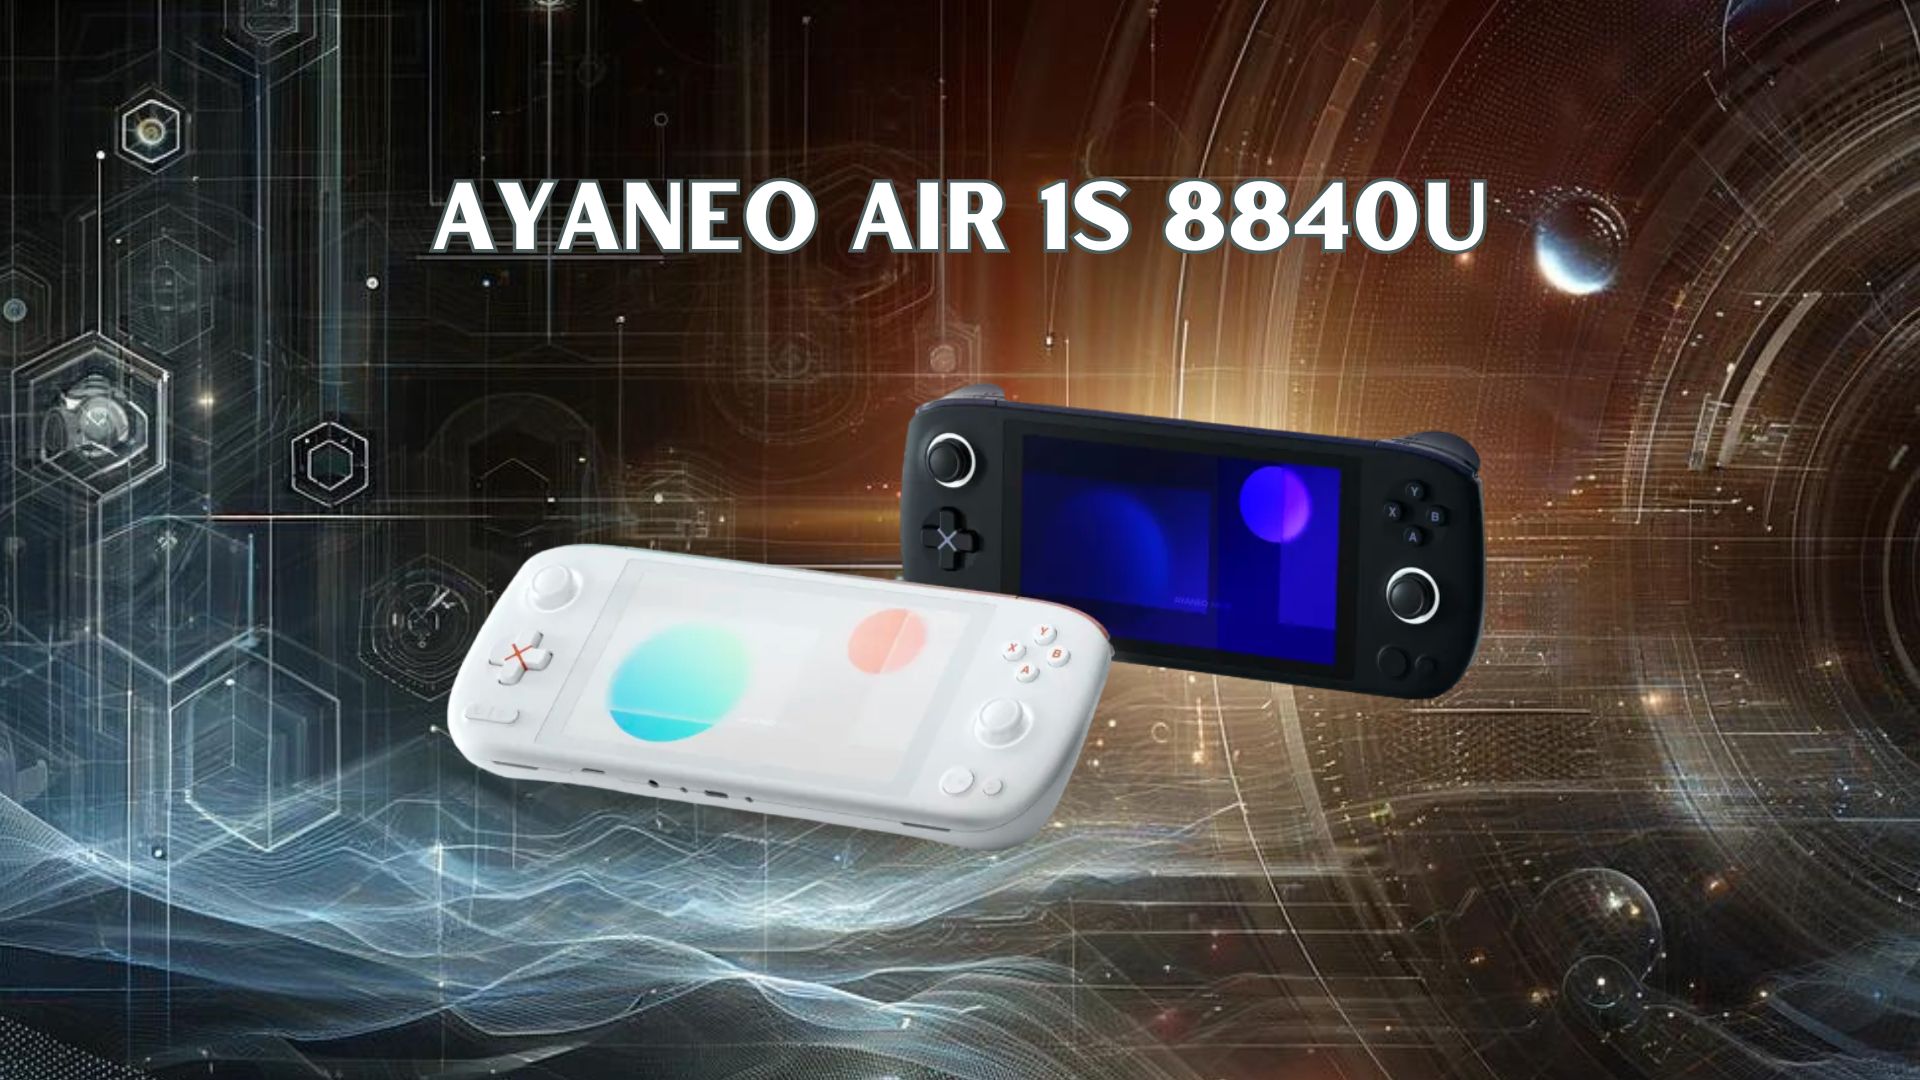 AYANEO Air 1S 8840U model refresh announced of this handheld gaming PC